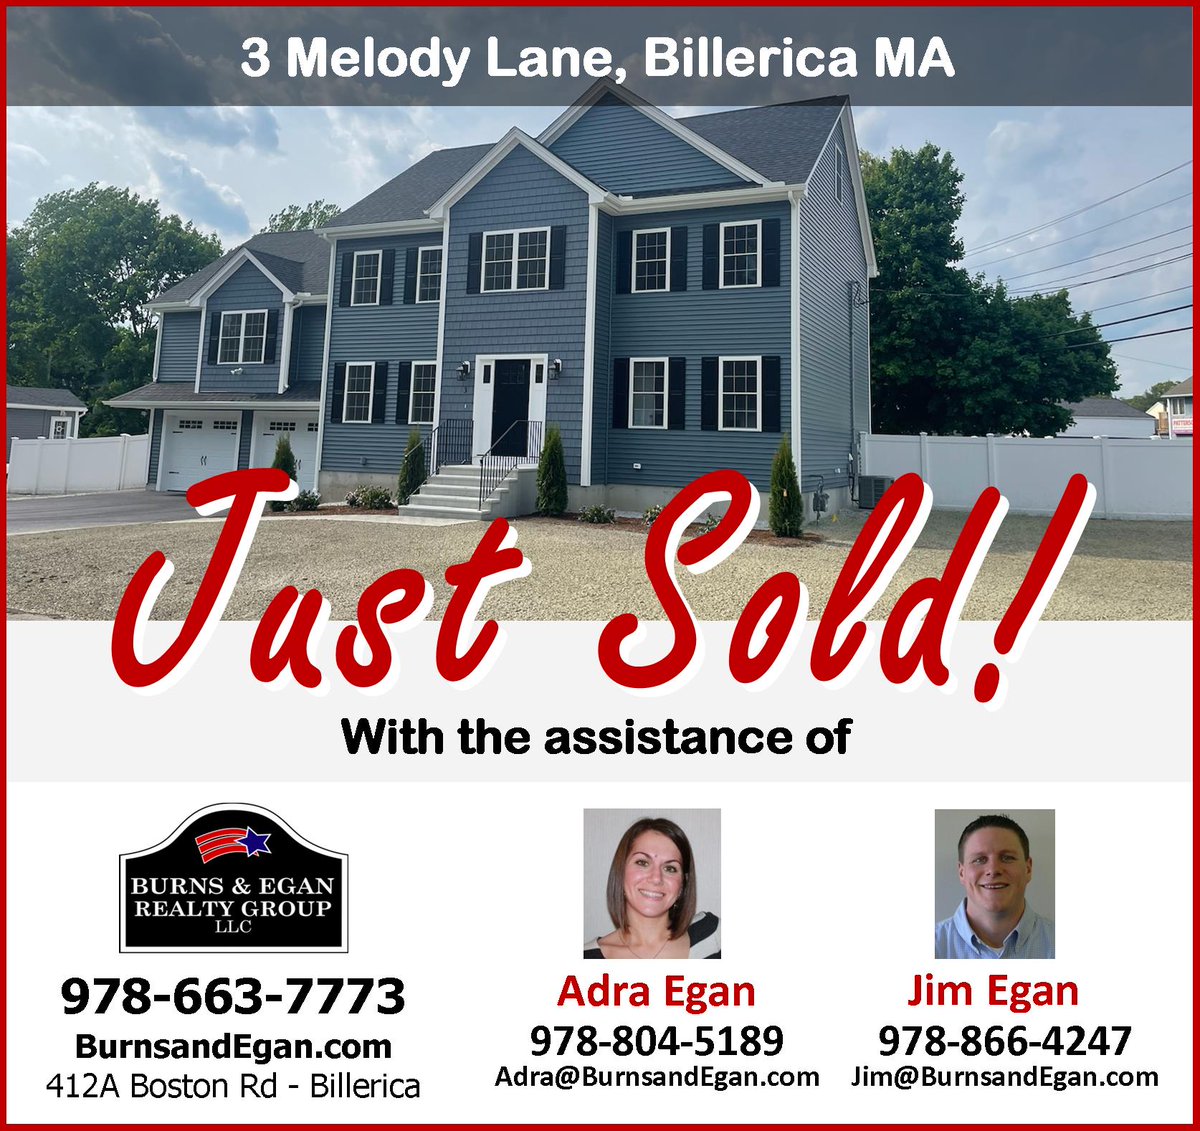 ANOTHER HAPPY HOMEOWNER JUST CLOSED ON THEIR NEW HOME!   Are you looking to buy a home in today's market? 
#Billericarealestate  #burnsandegan #Justsold #homeownership #homeownershipgoals #realestate #Billericahomes  #BillericaMA #realestatemarket  #dreamhome #househunting